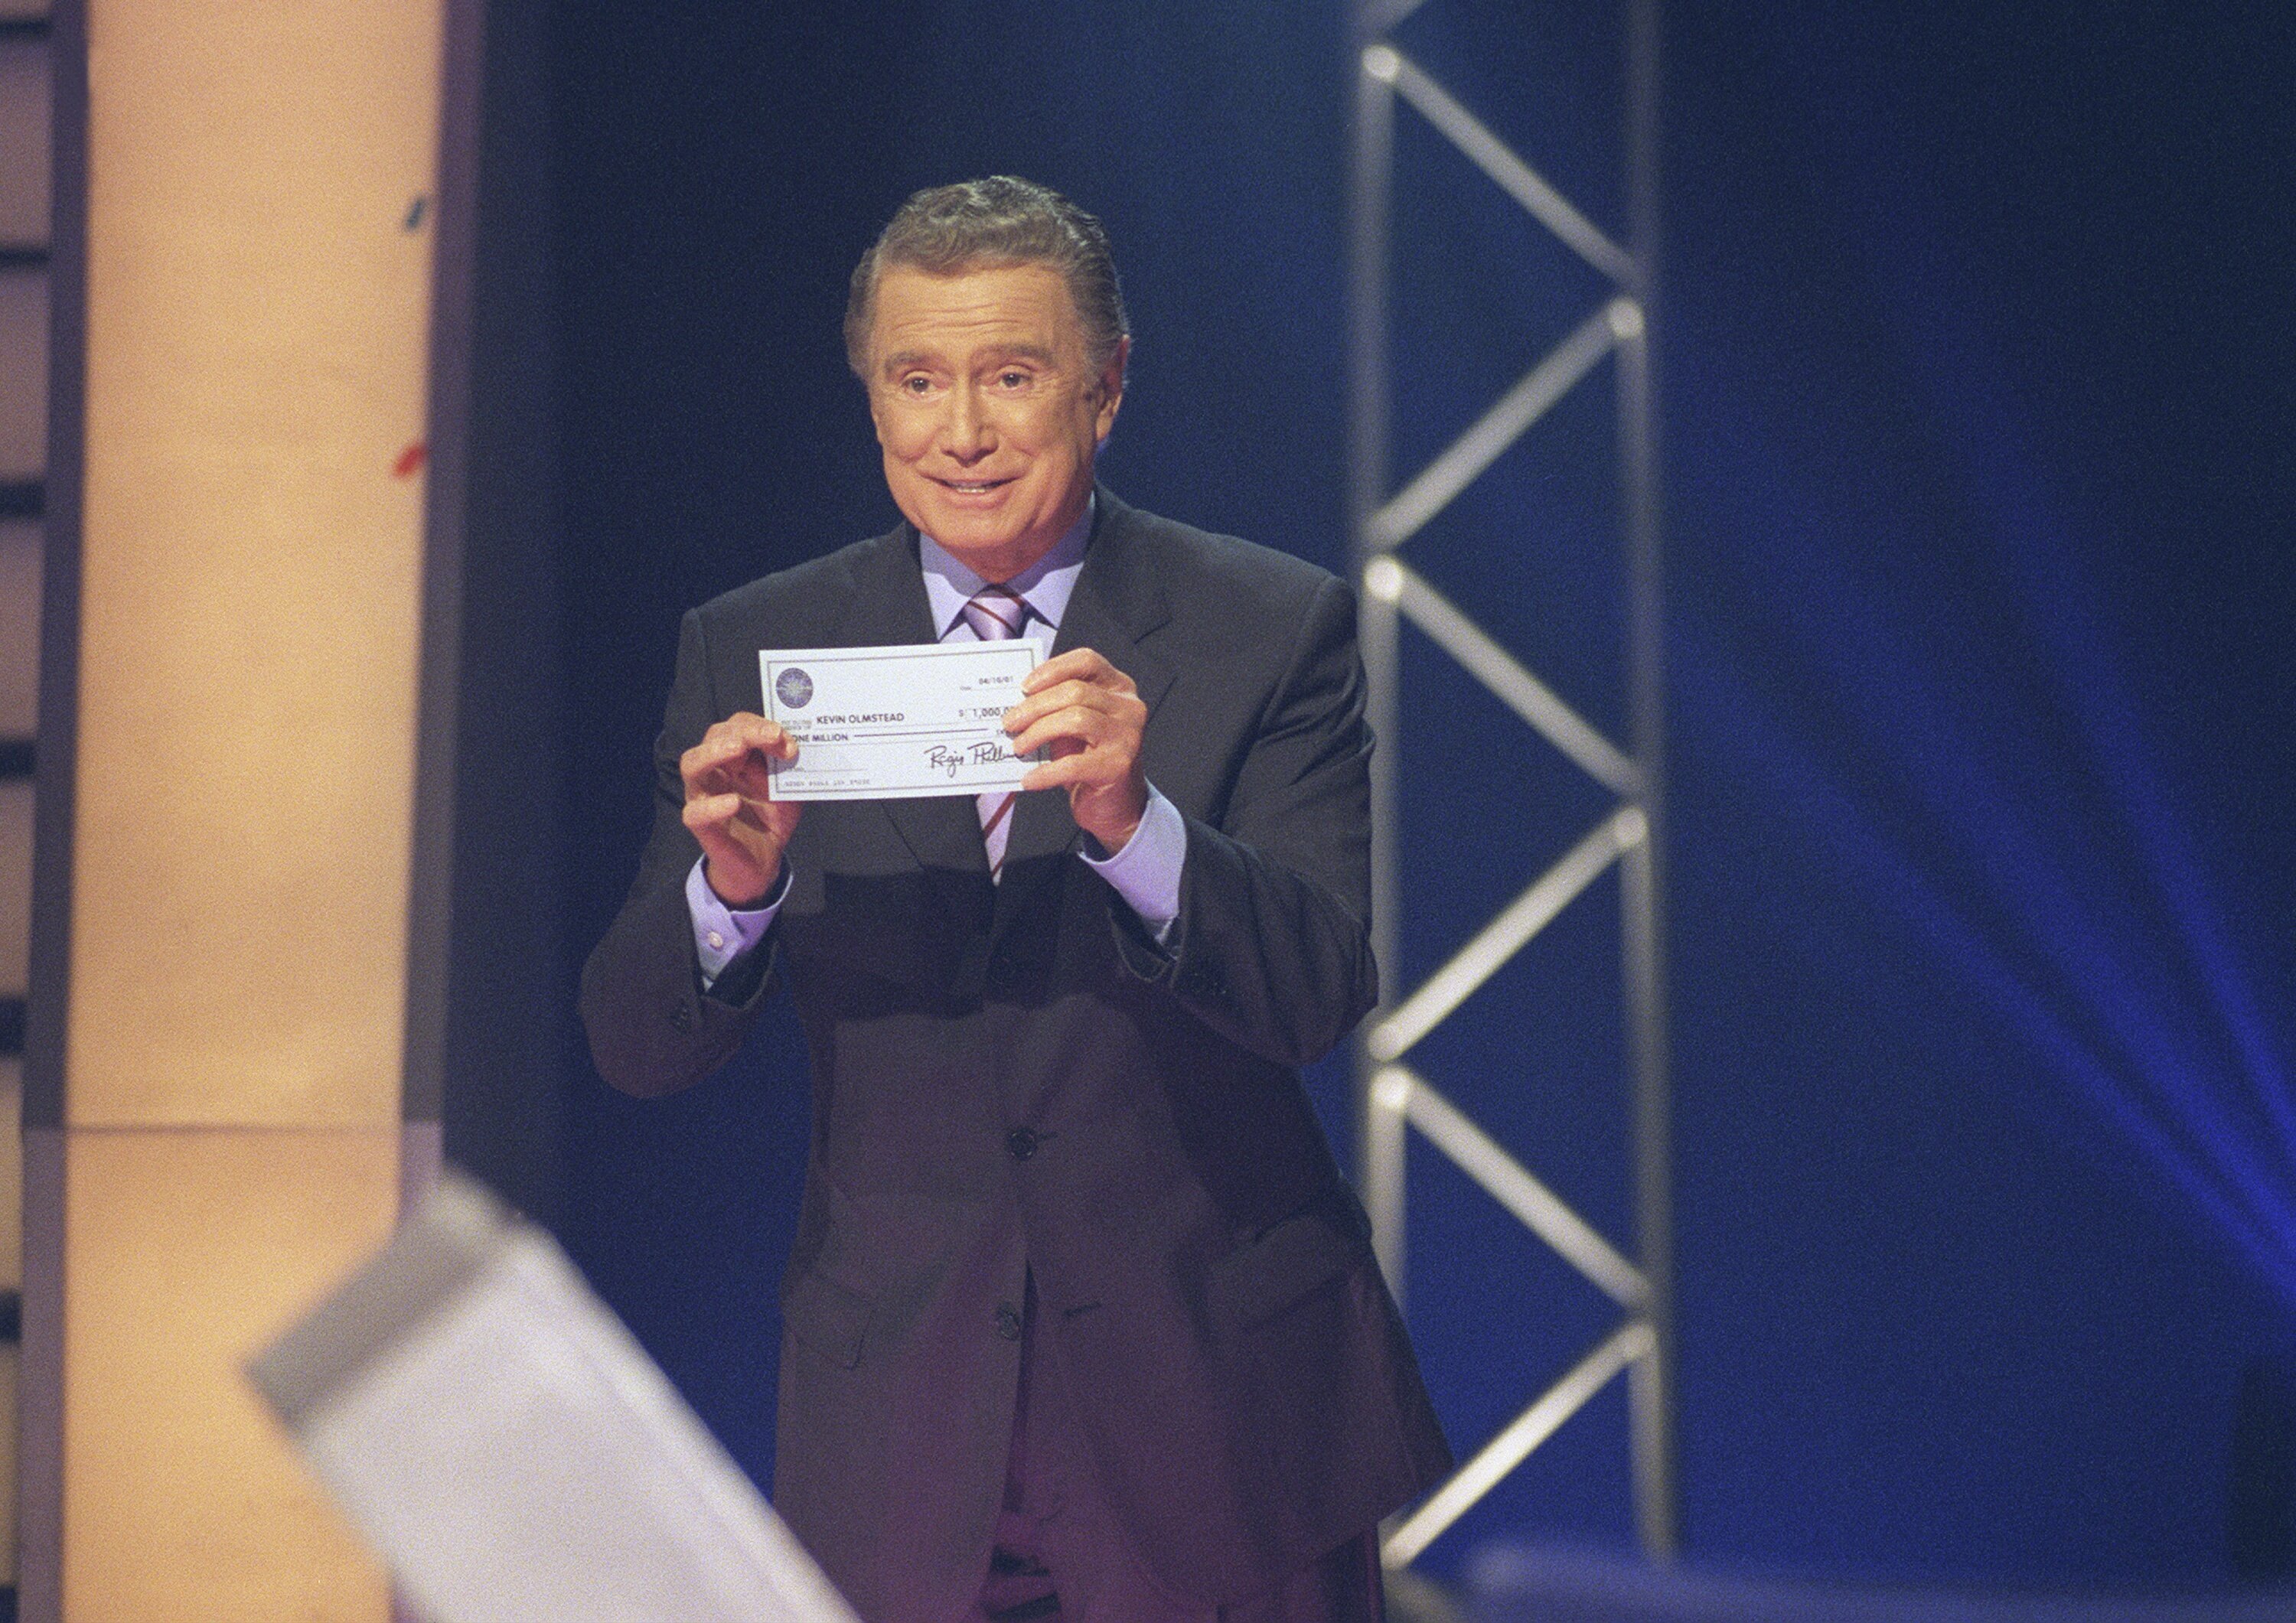 â€˜Who Wants To Be A Millionaireâ€™ Ending After 20-Year Run